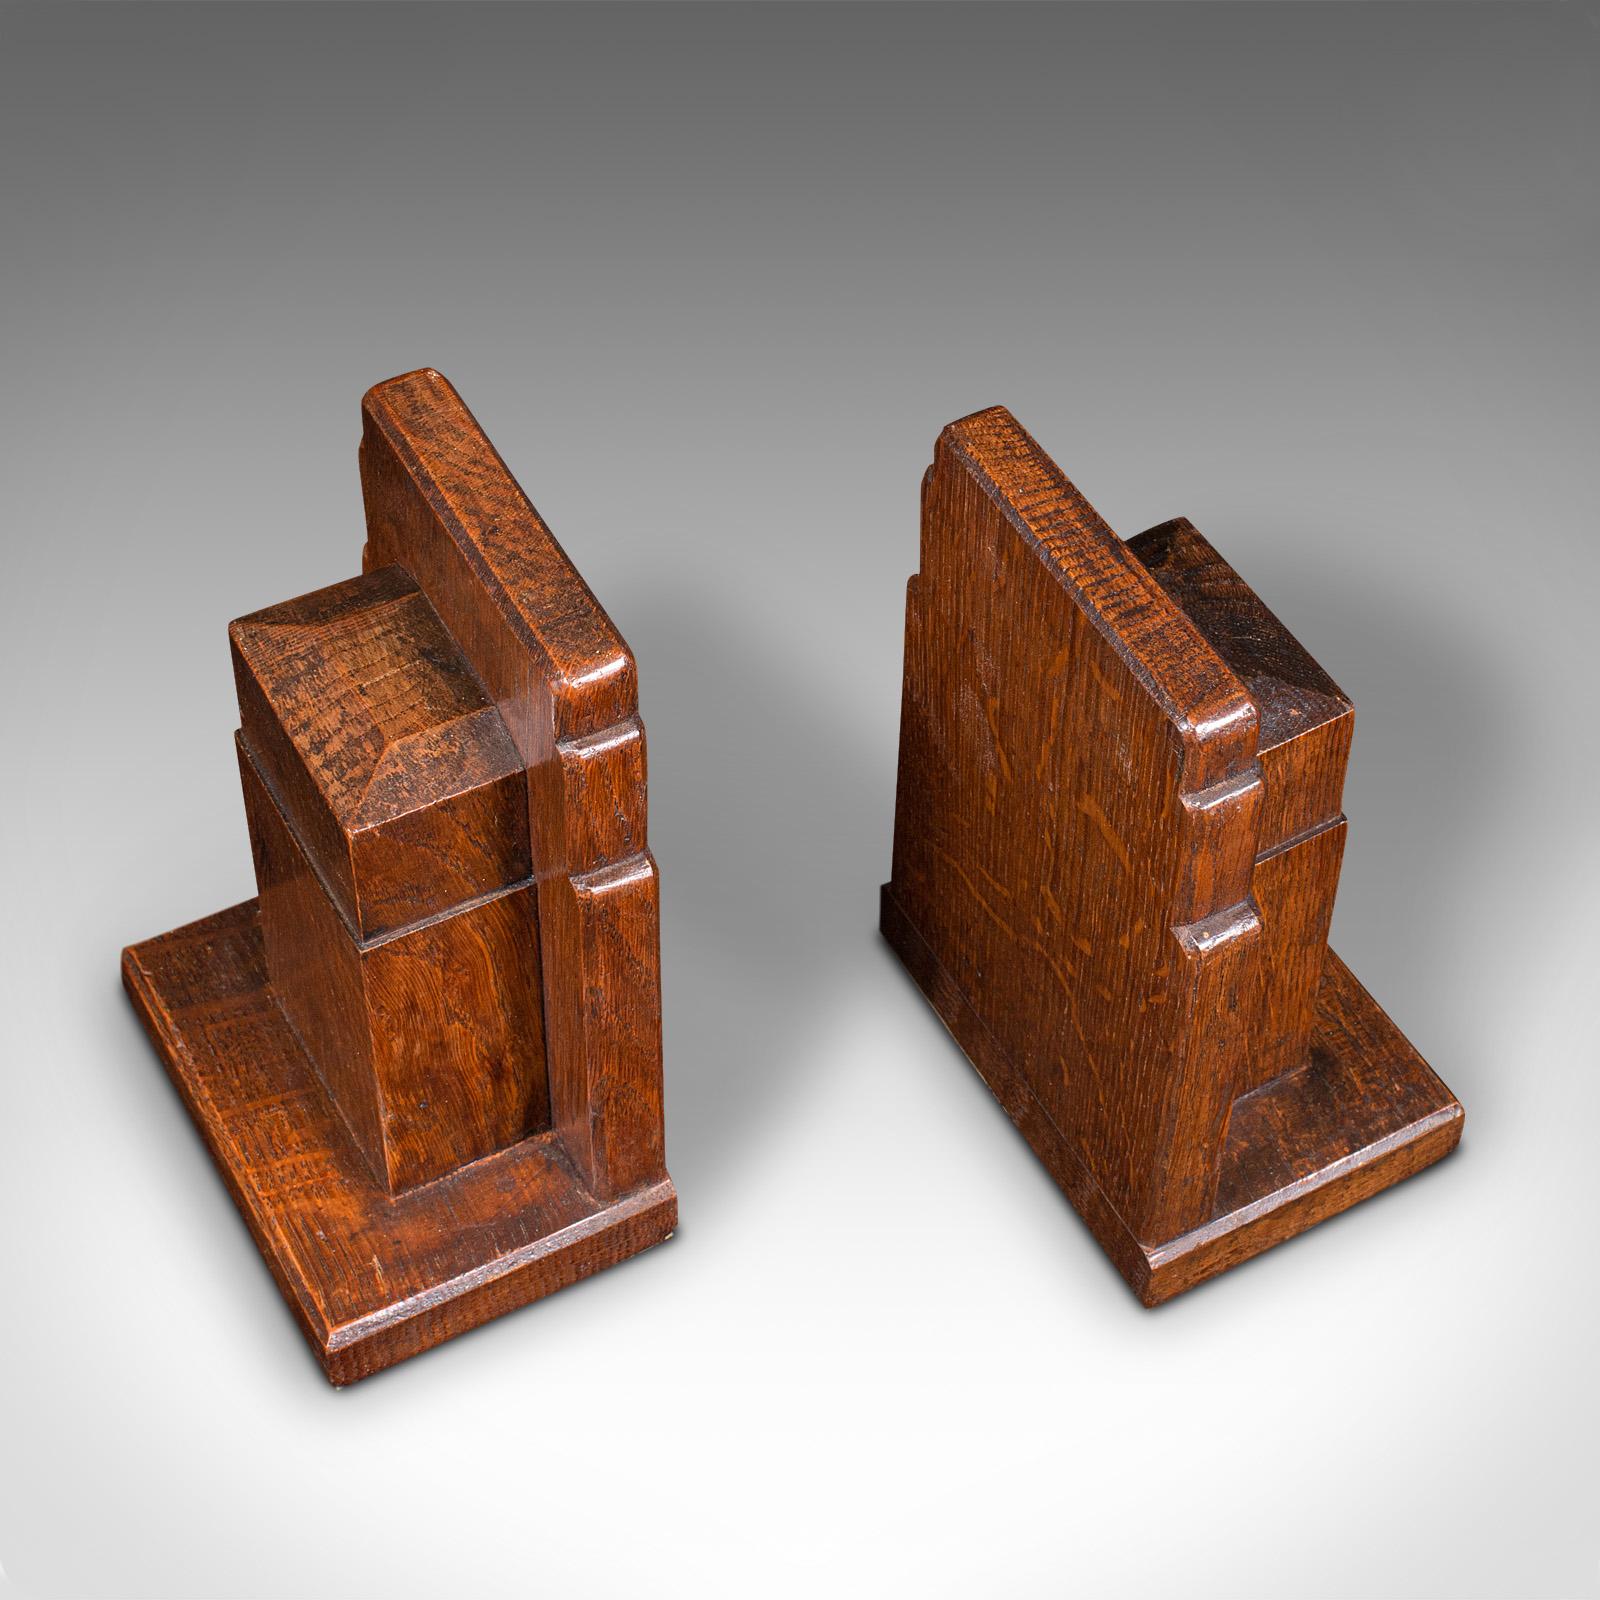 20th Century Pair of Vintage Decorative Bookends, English, Oak, Book Rest, Early 20th, C.1930 For Sale